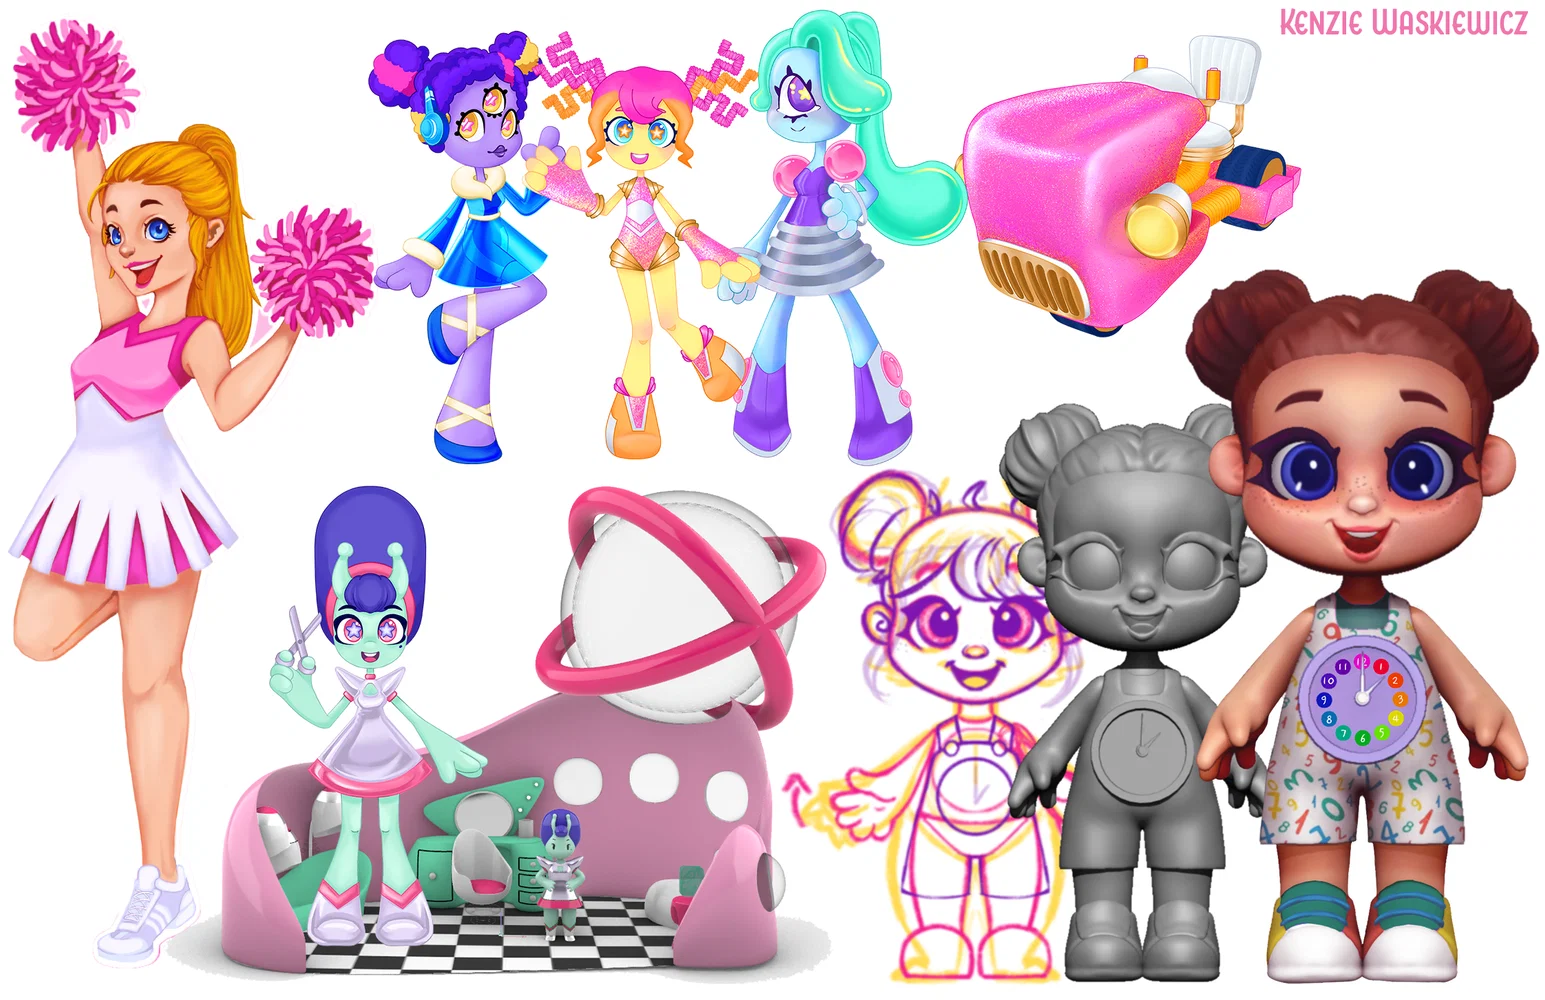 a collage of dolls and collectible toys created by kenzie